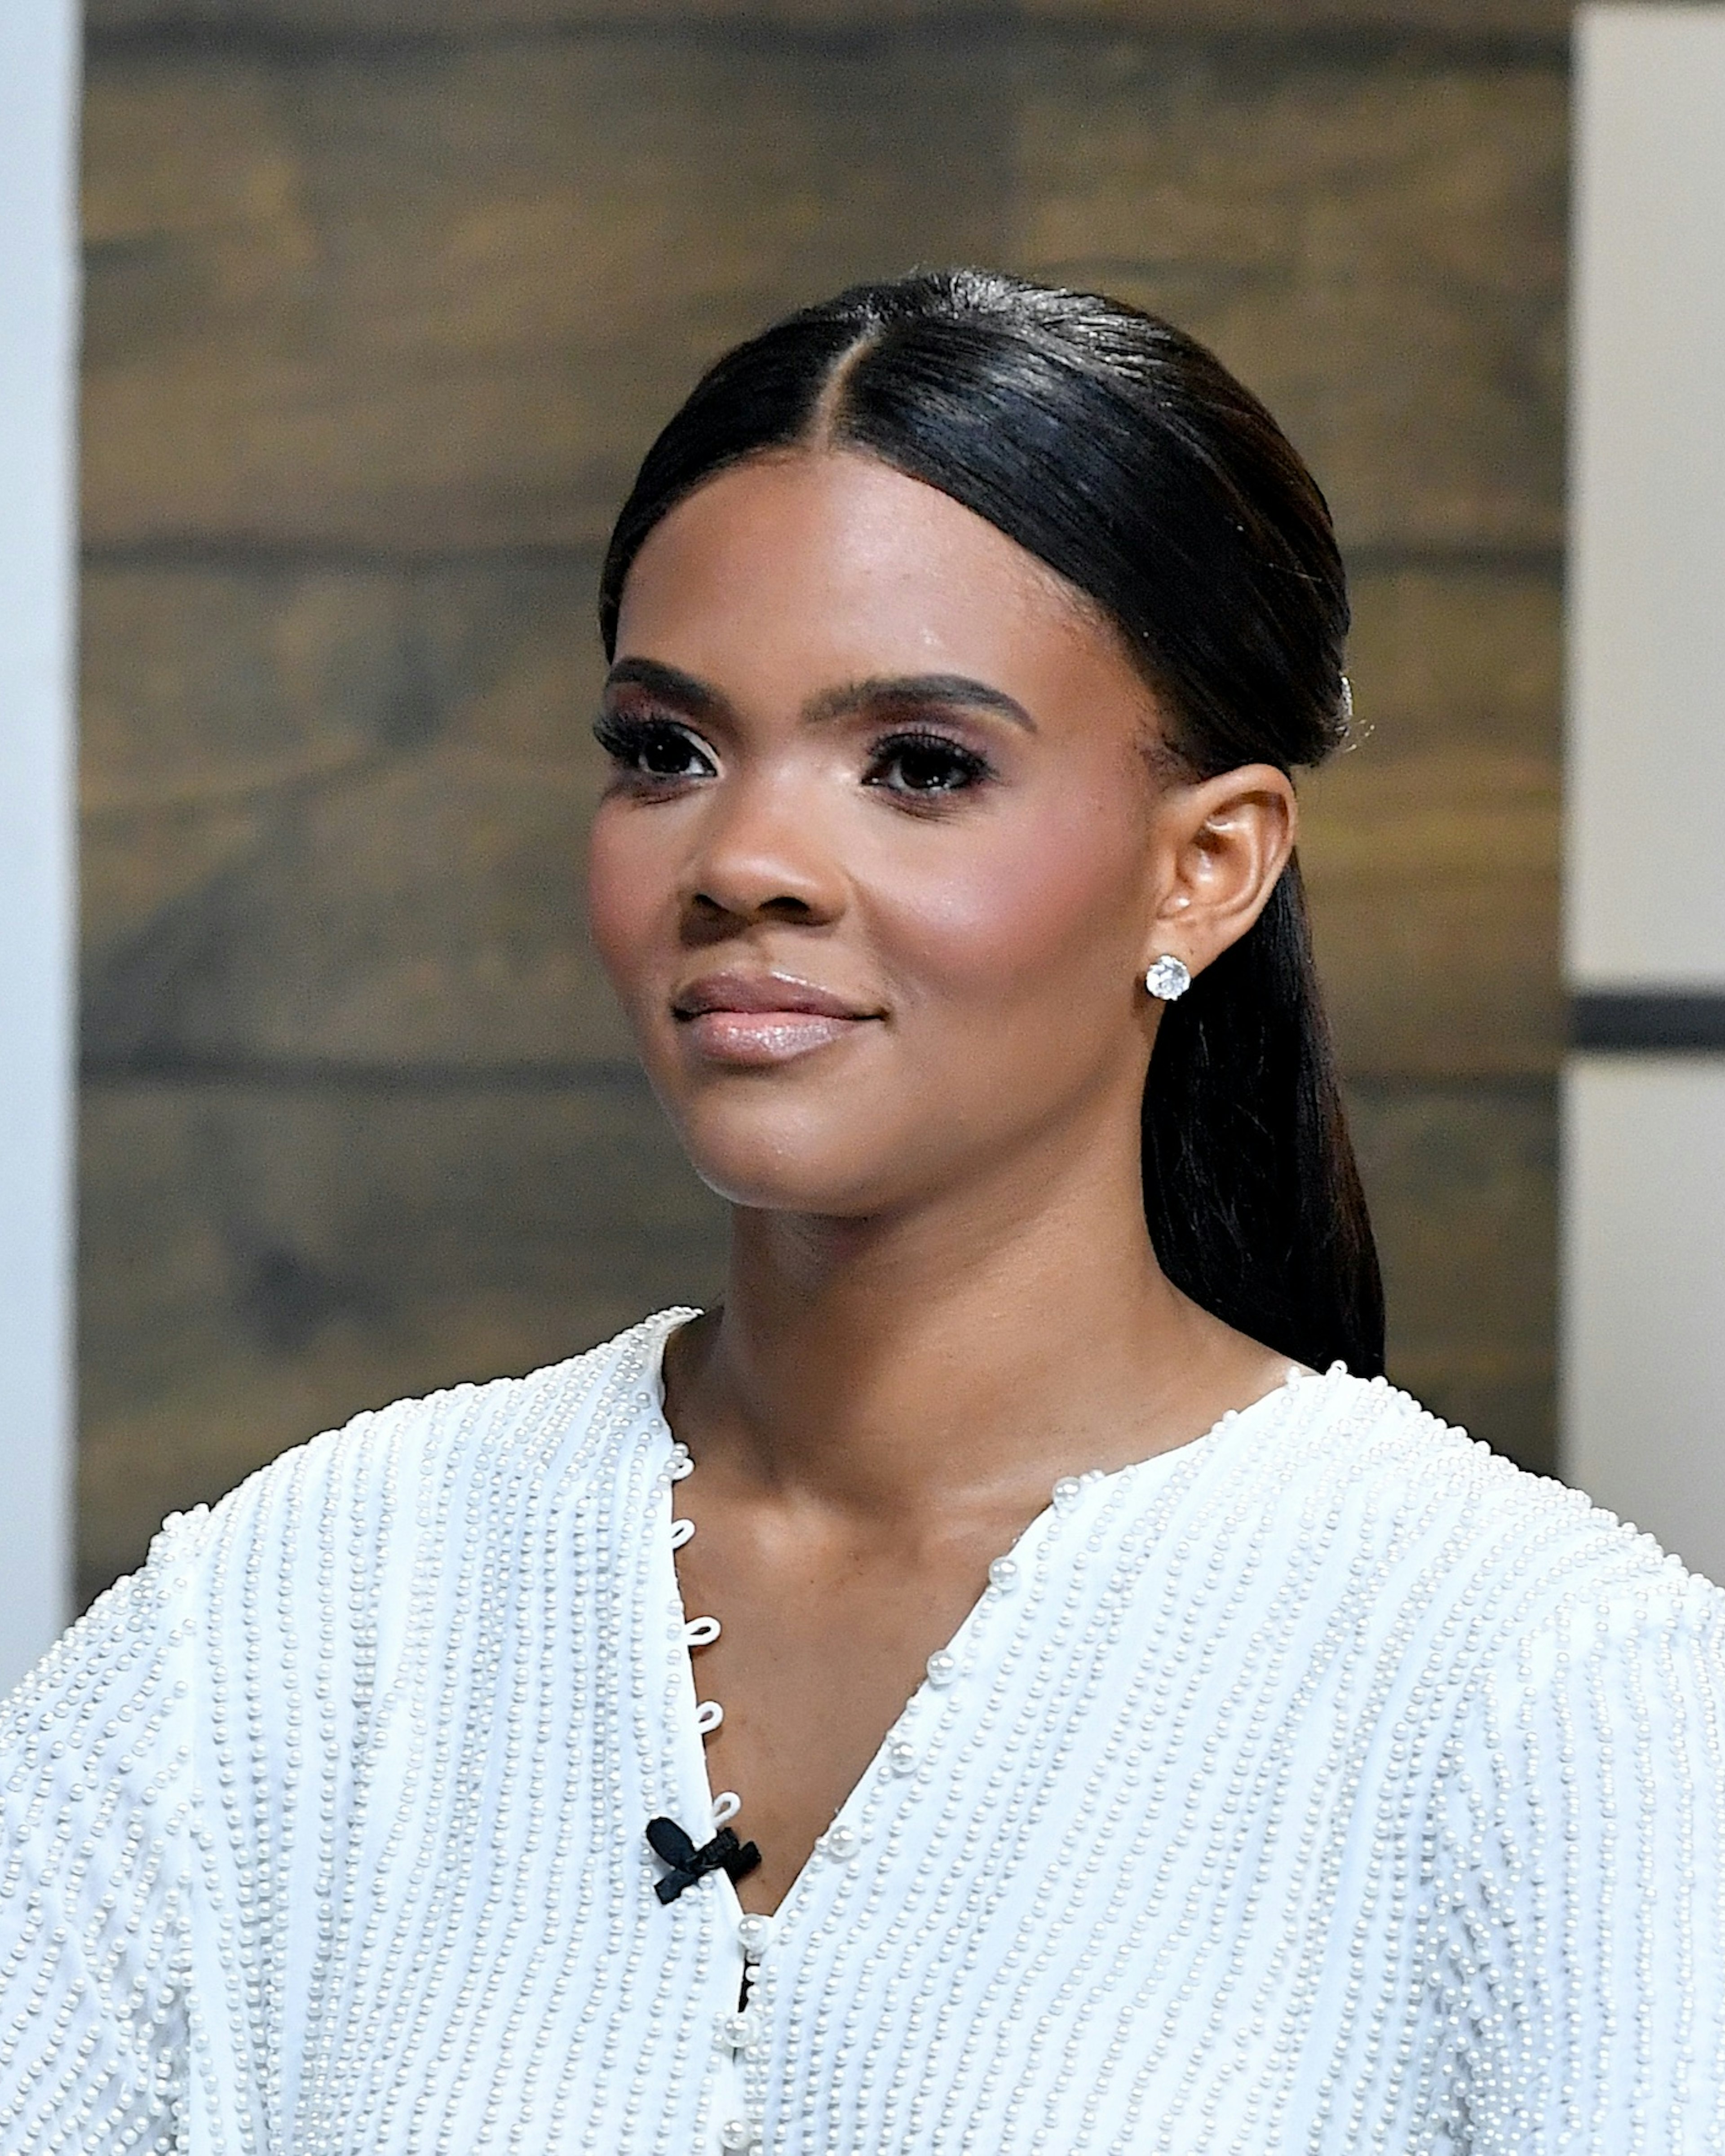 Candace Owens is seen on the set of "Candace" on June 21, 2021 in Nashville, Tennessee. The show will air on Tuesday, June 22, 2021. (Photo by Jason Davis/Getty Images)